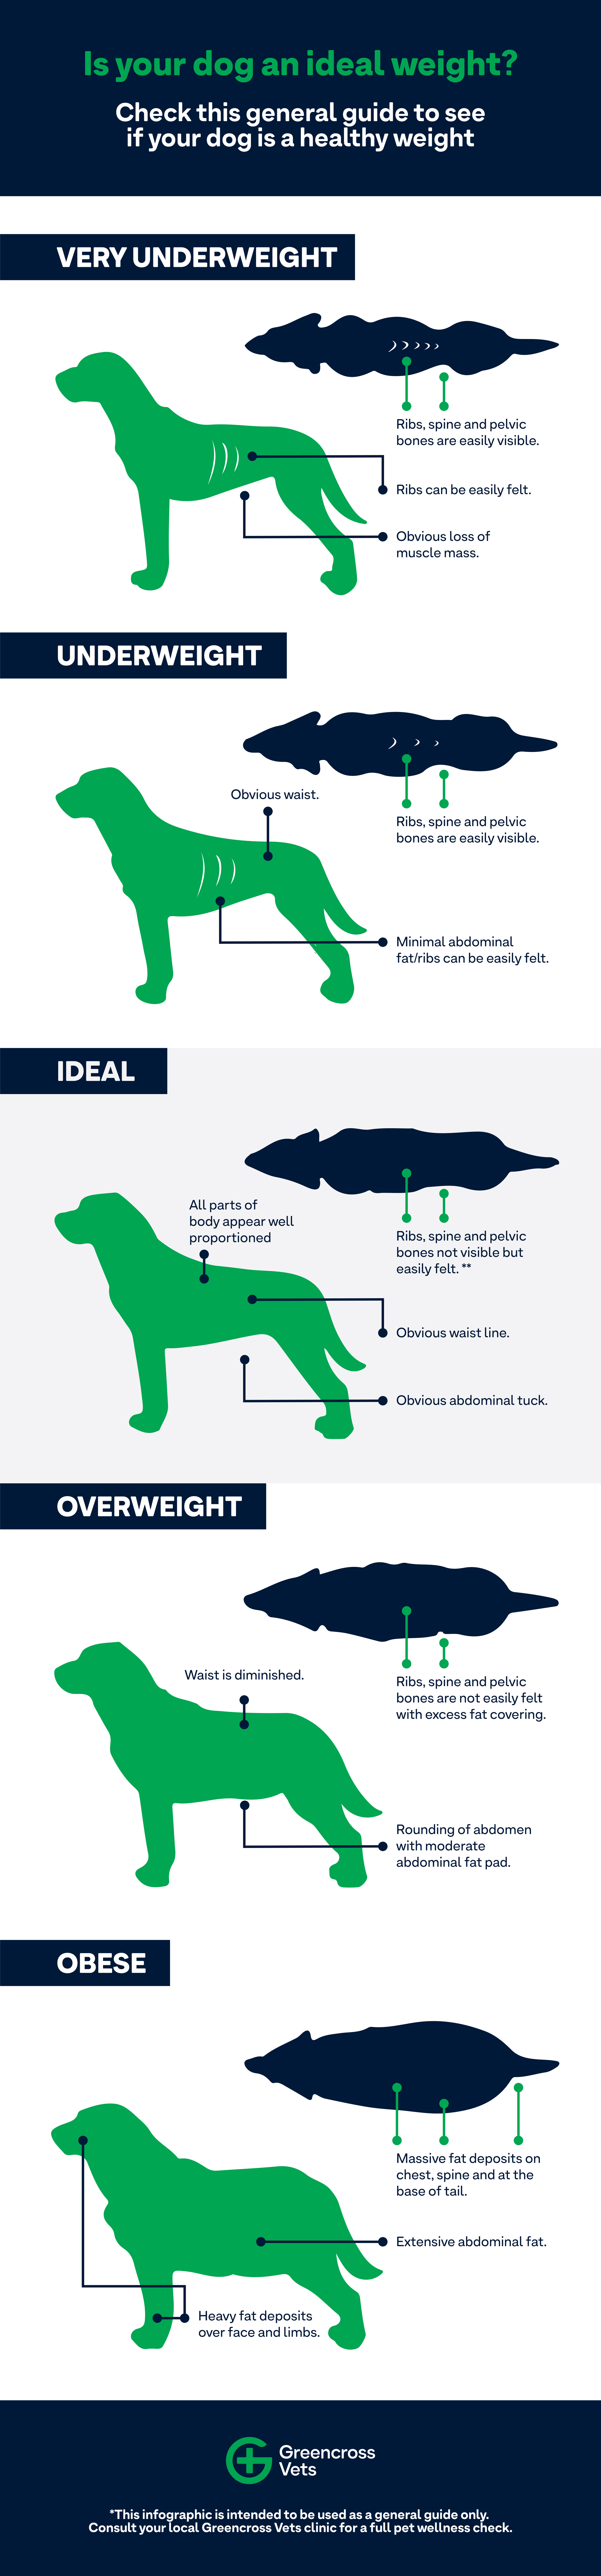 Infographic illustration the different levels of weight for a dog, what is ideal and how you can tell